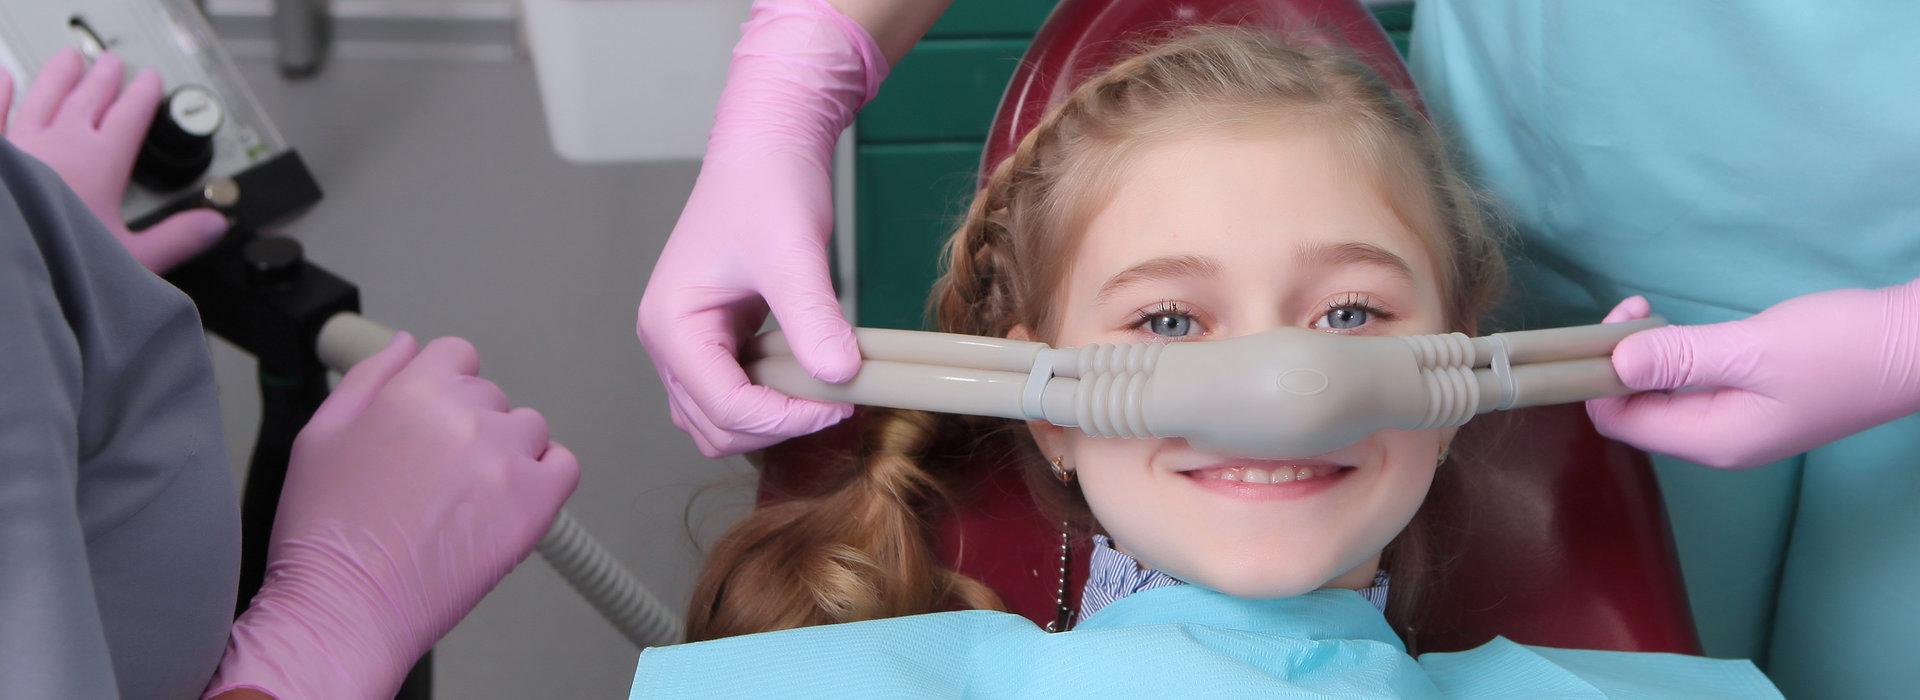 A child is smiling after Sedation Dentistry.